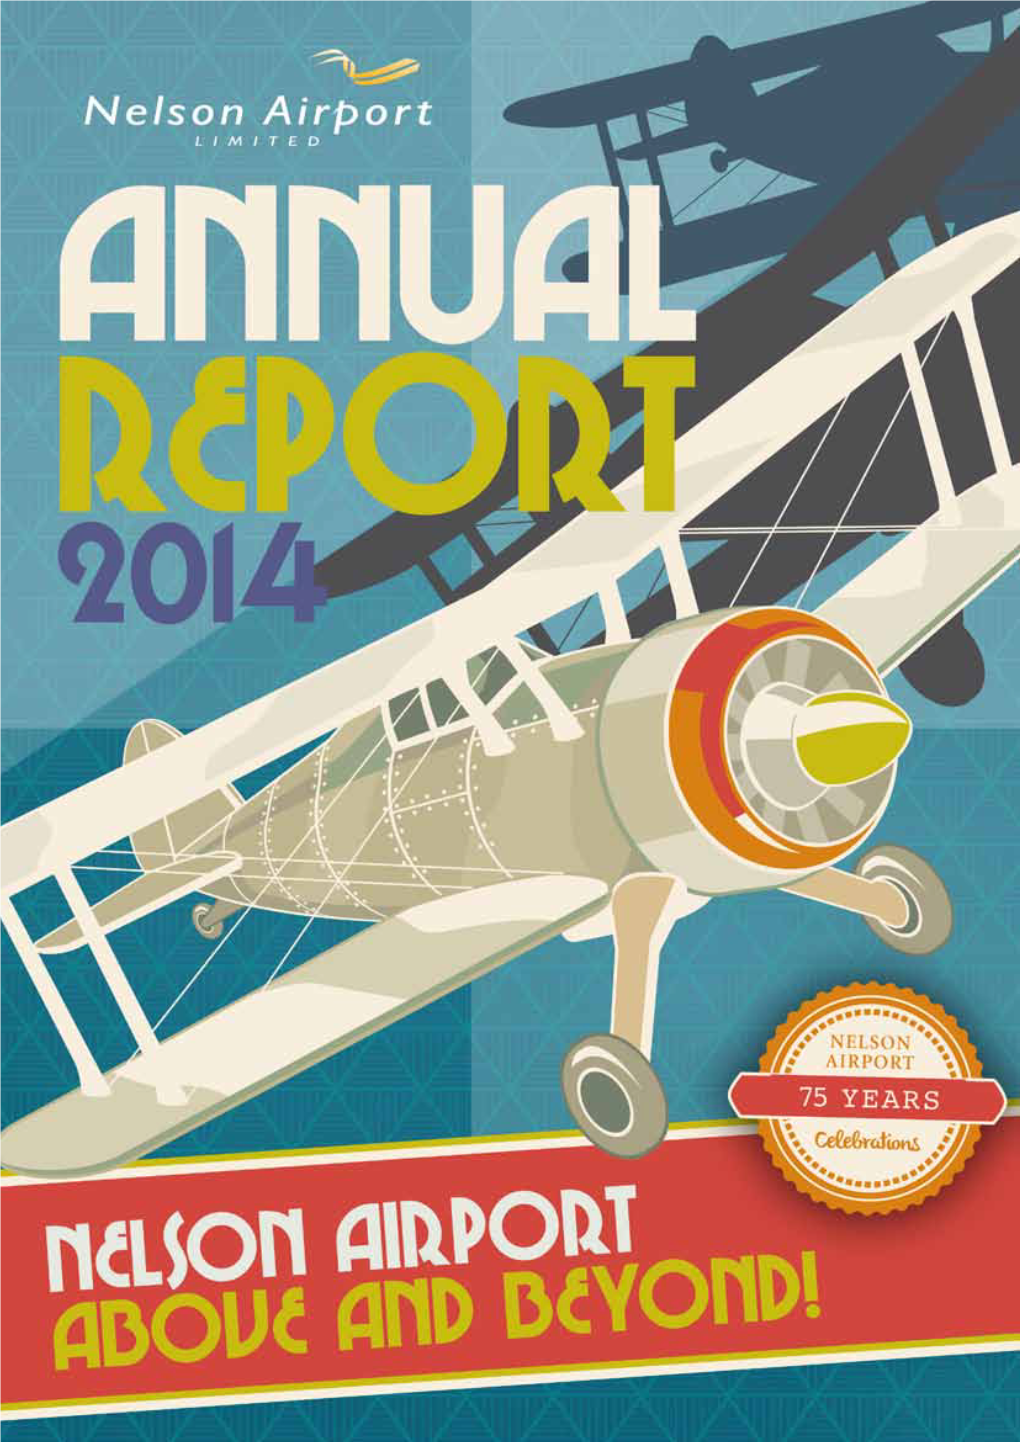 View the 2014 Annual Report